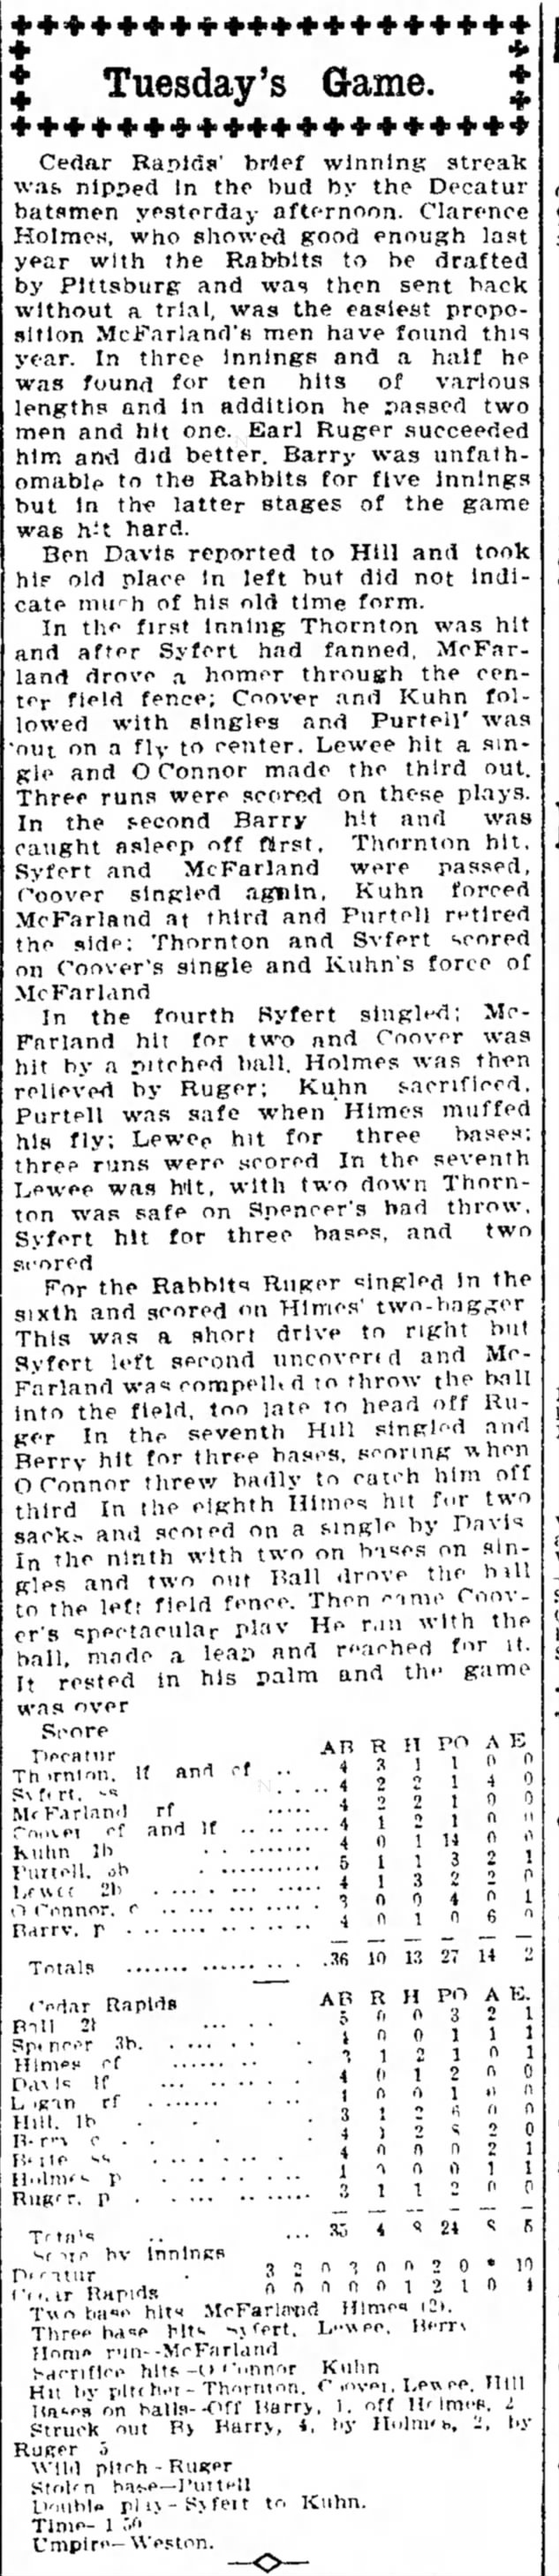 Earl Ruger pitches for Cedar Rapids Rabbits 17 May 1905